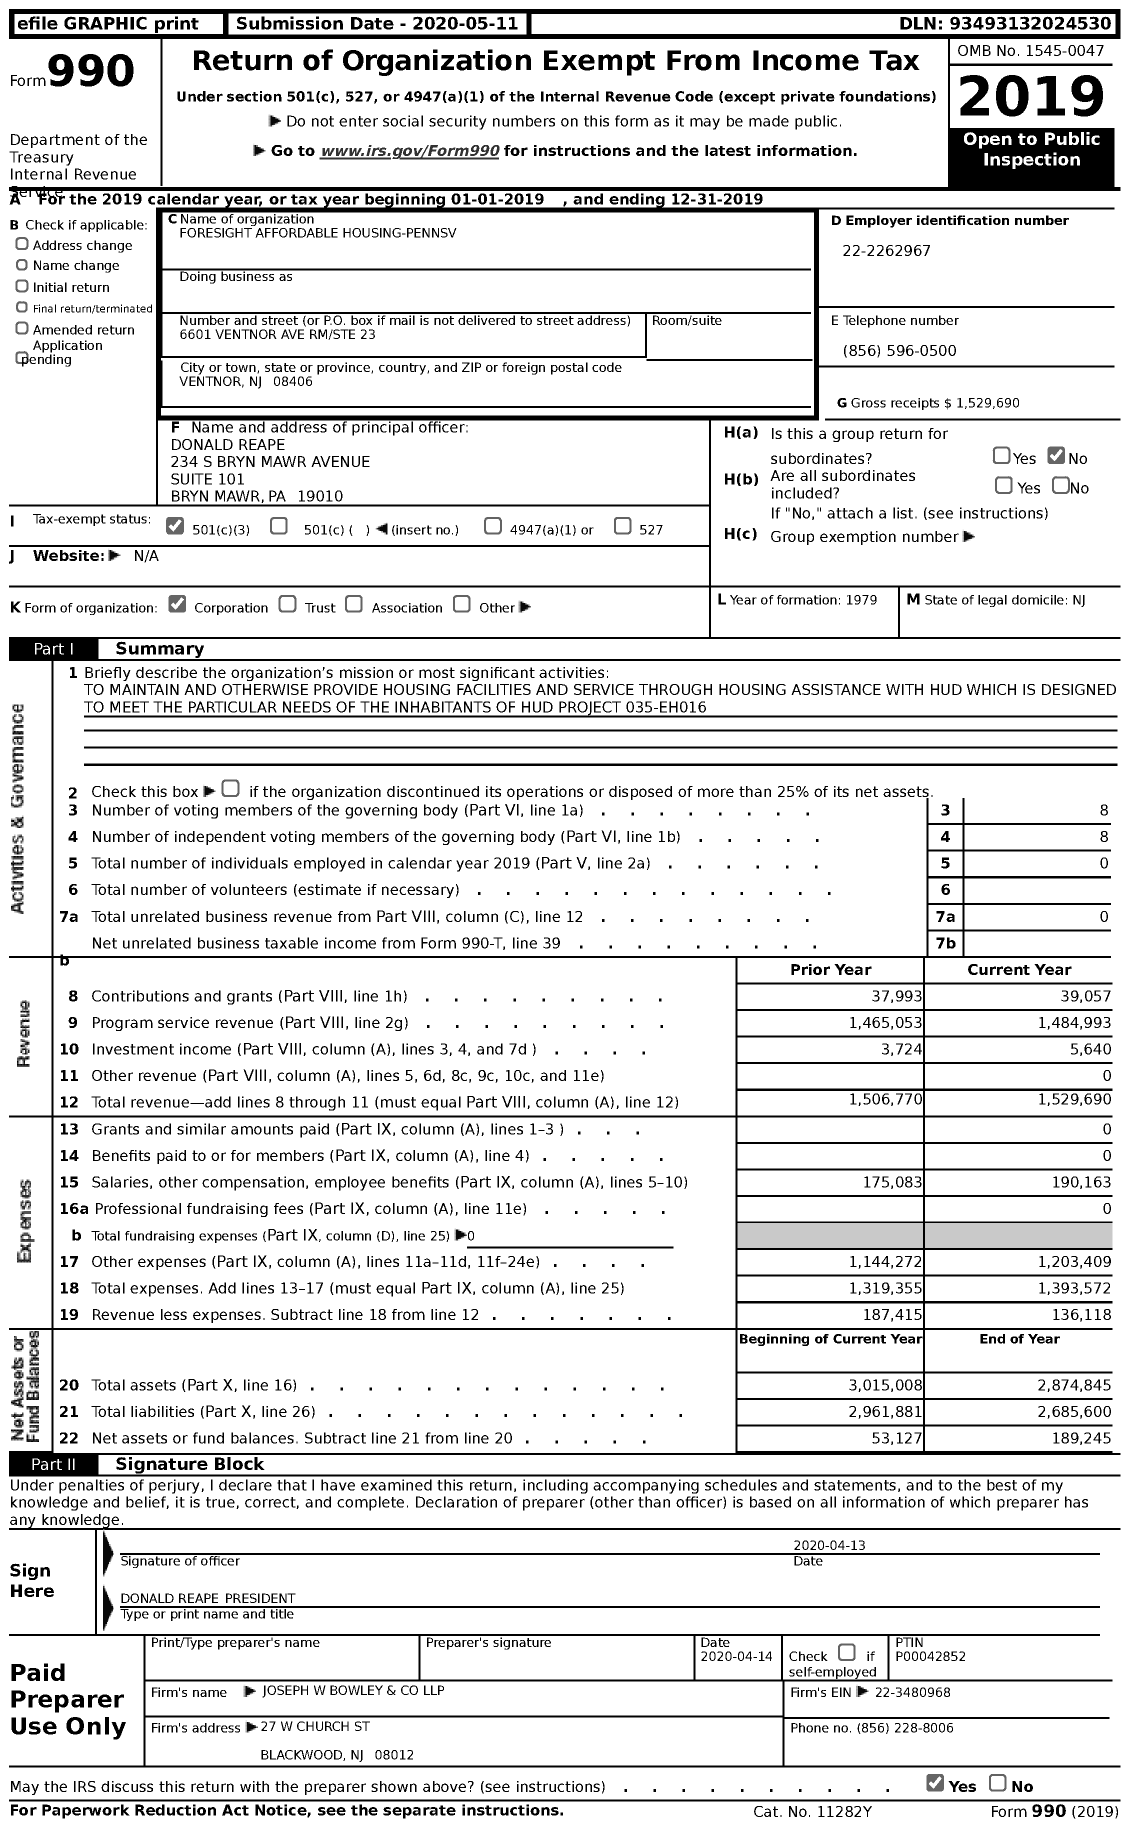 Image of first page of 2019 Form 990 for Foresight Affordable Housing-Pennsv